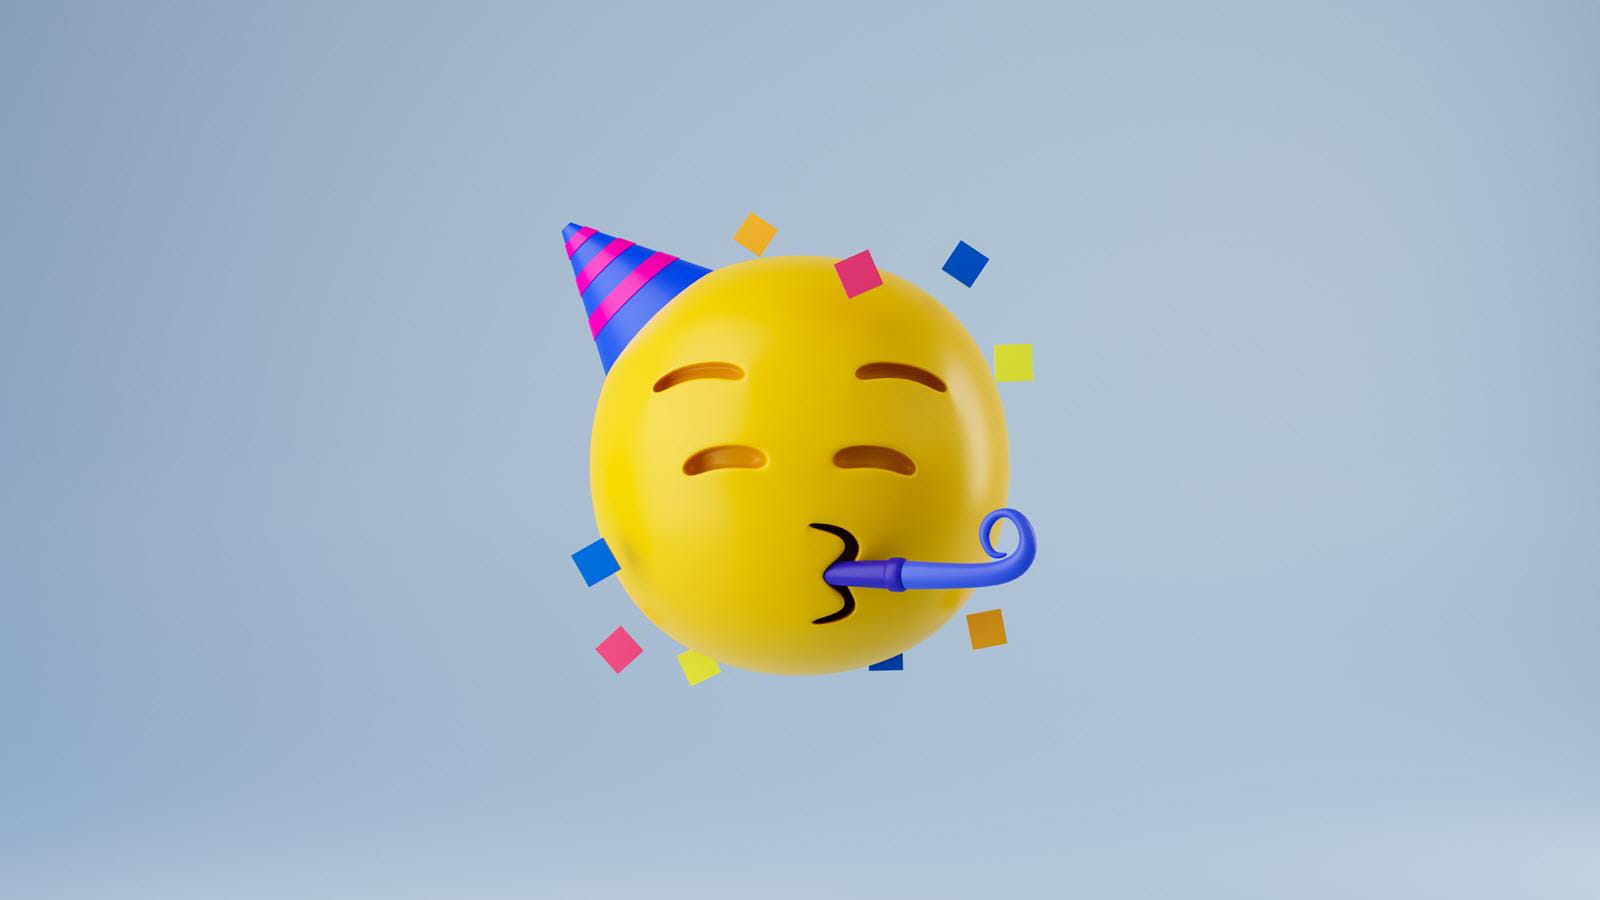 Celebrating emoji with party hat and horn